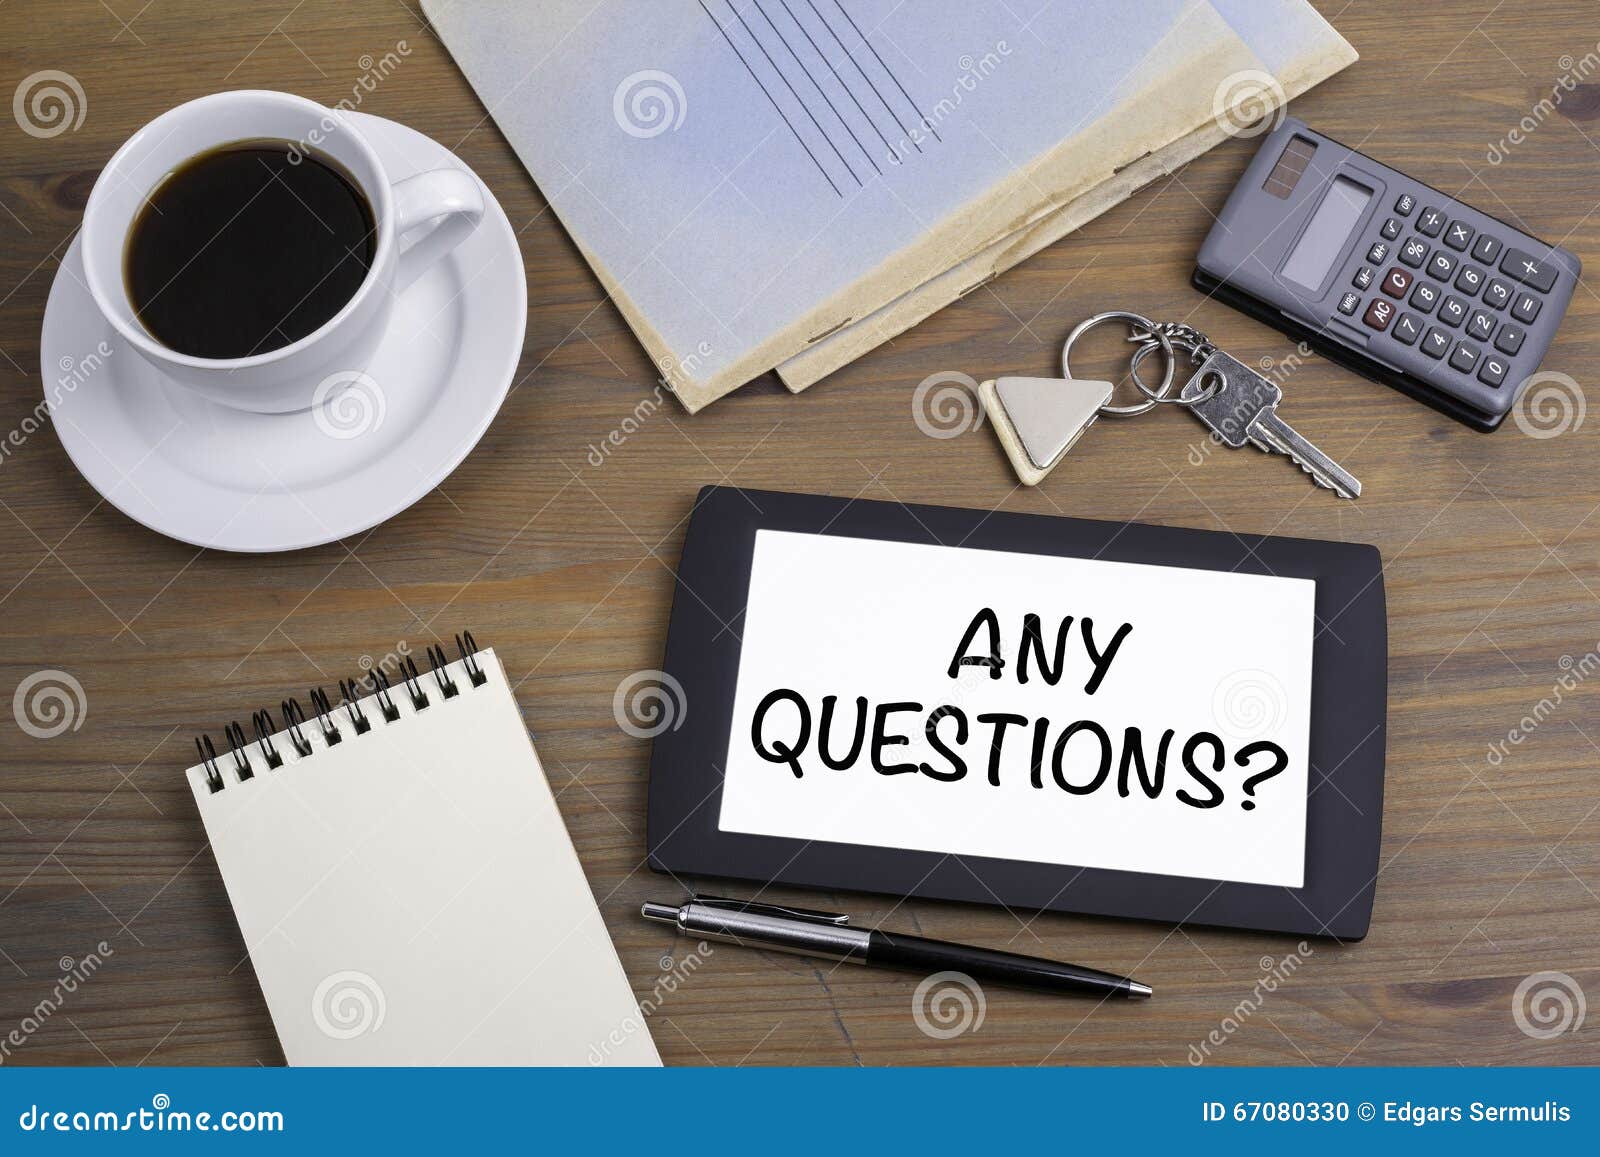 any questions? text on tablet device on a wooden table